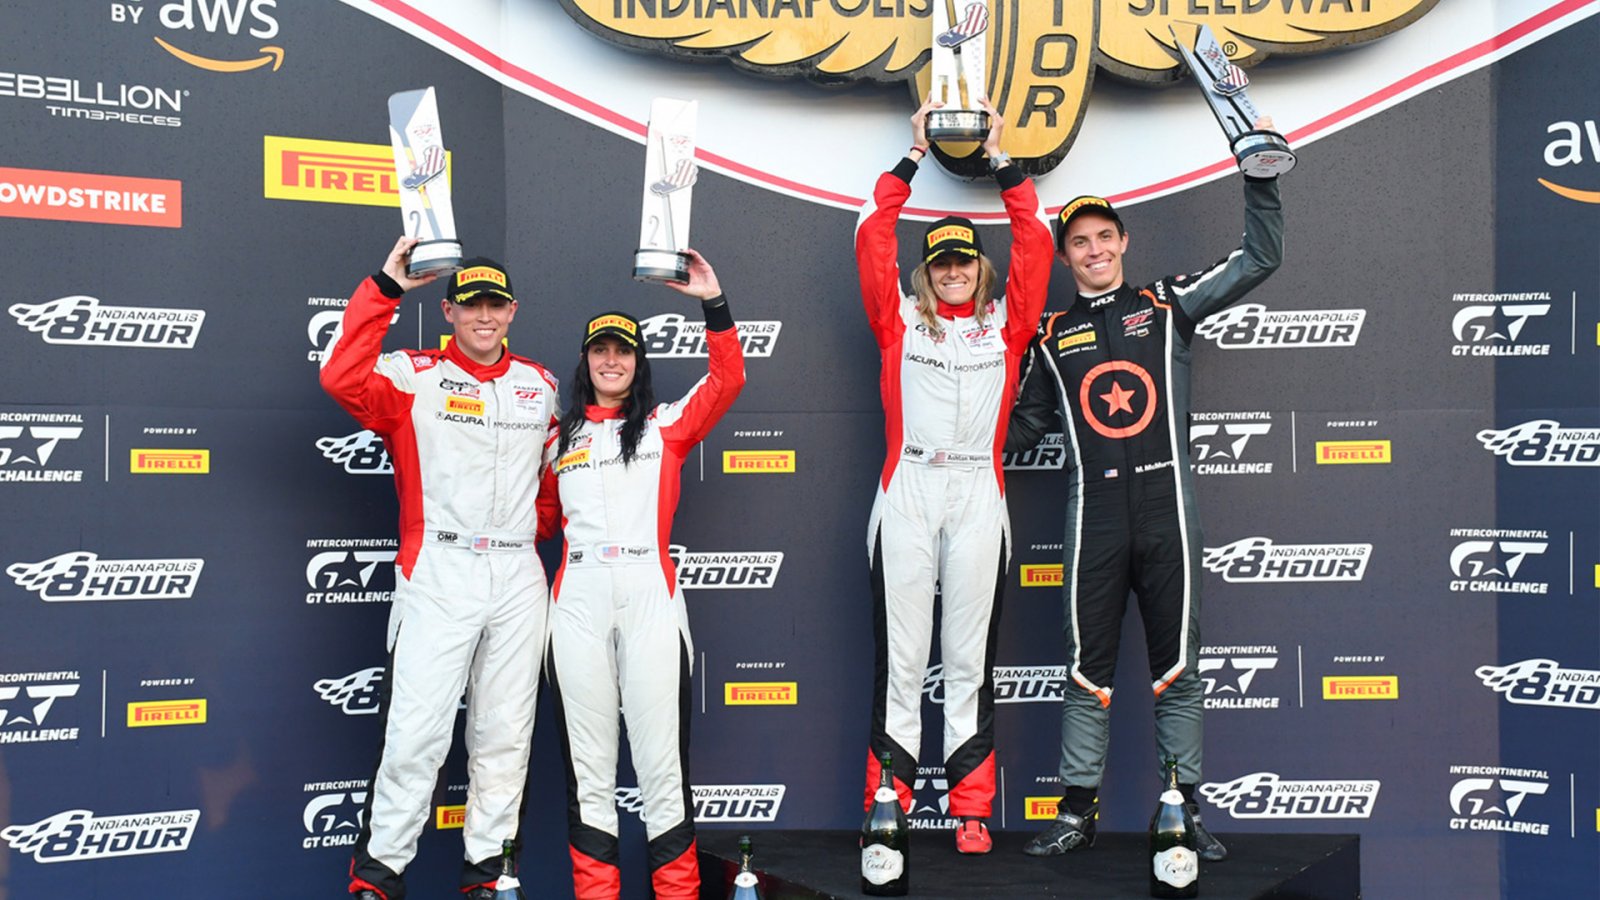 Double Victories, Historic Win for Acura Drivers at Indianapolis Endurance Run